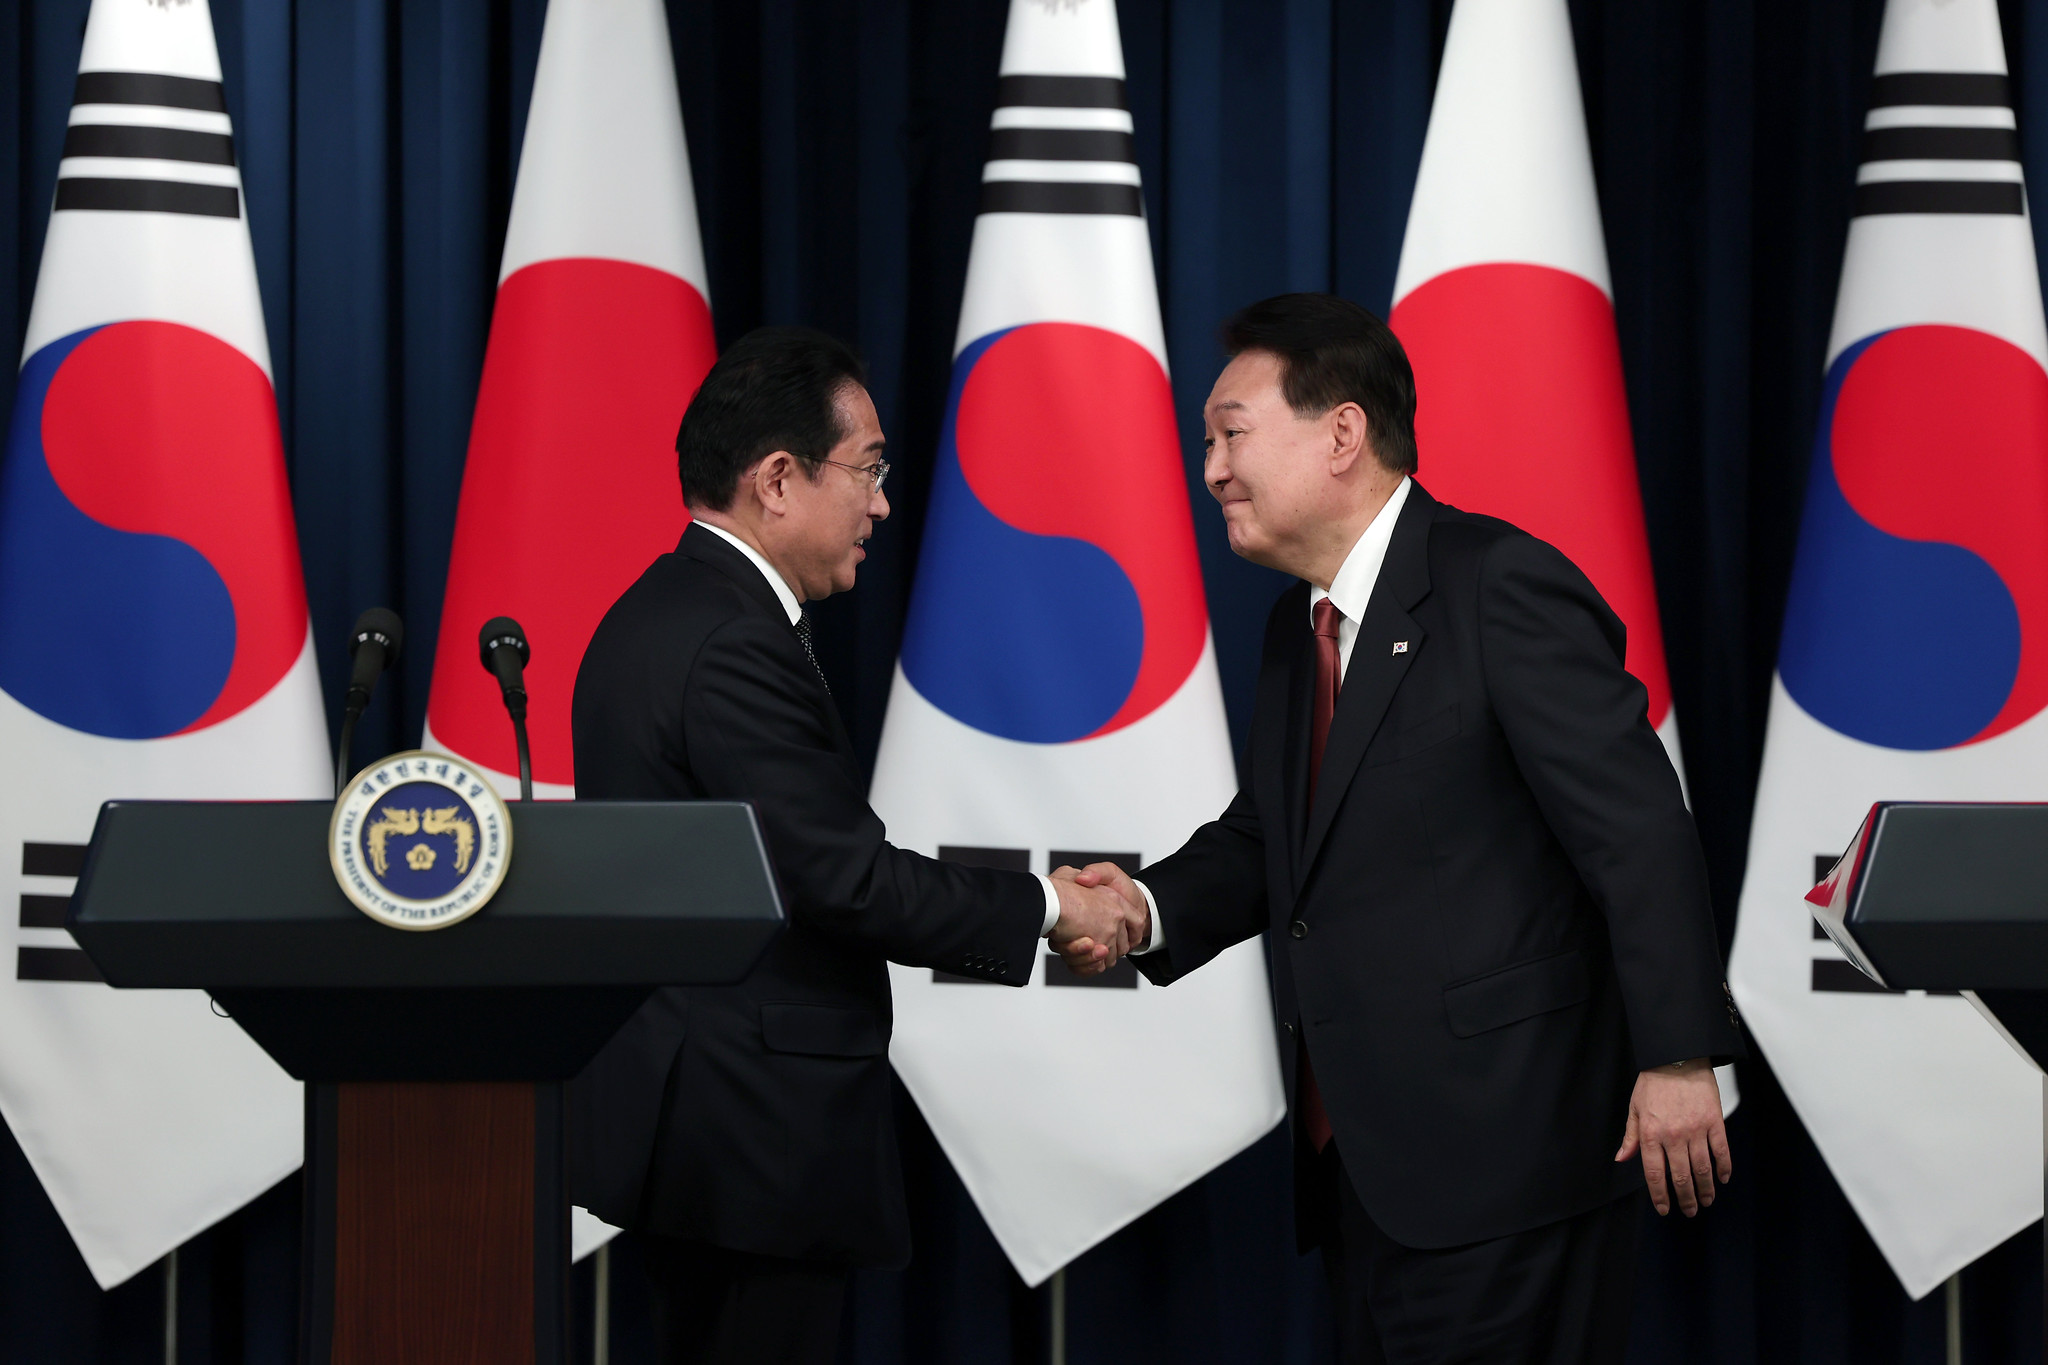 President Yoon Suk Yeol on April 17 held a phone summit with Japanese Prime Minister Fumio Kishida on close bilateral cooperation for regional peace. Shown is President Yoon (right) on May 7, 2023, shaking hands with his Japanese counterpart at a joint news conference hosted by the Office of the President in Seoul's Yongsan District. (Kim Yong Wii from Office of the President)